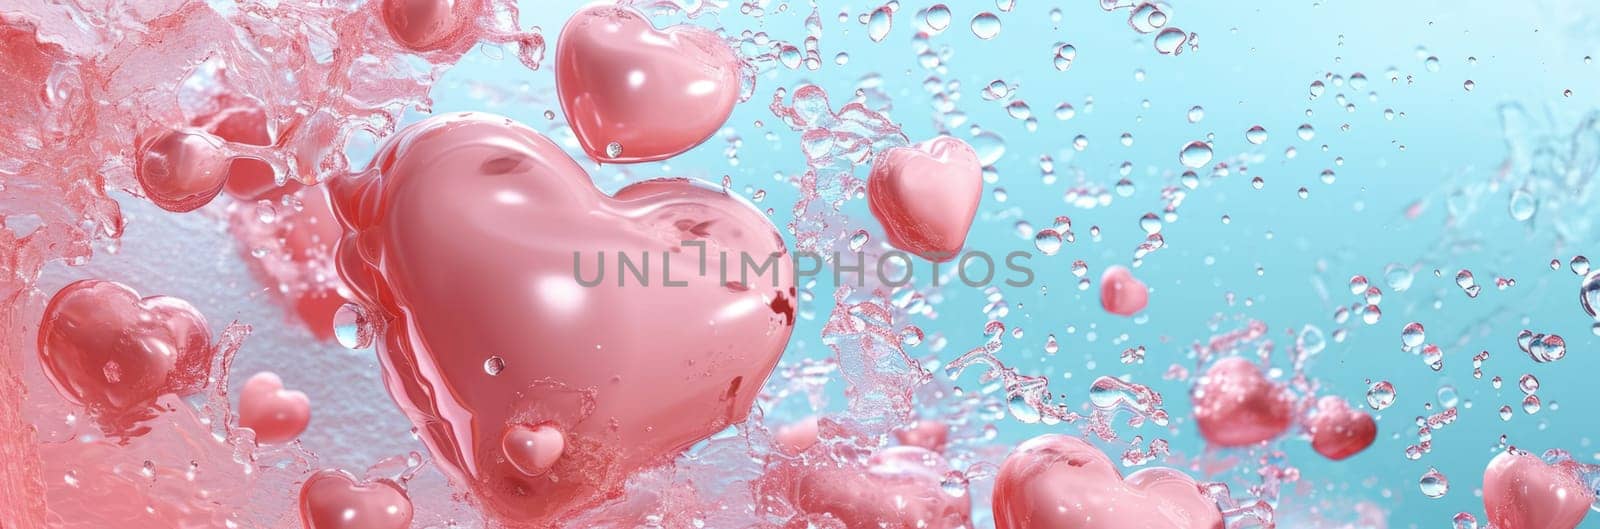 pink hearts valentines day abstract background and design backdrop pragma